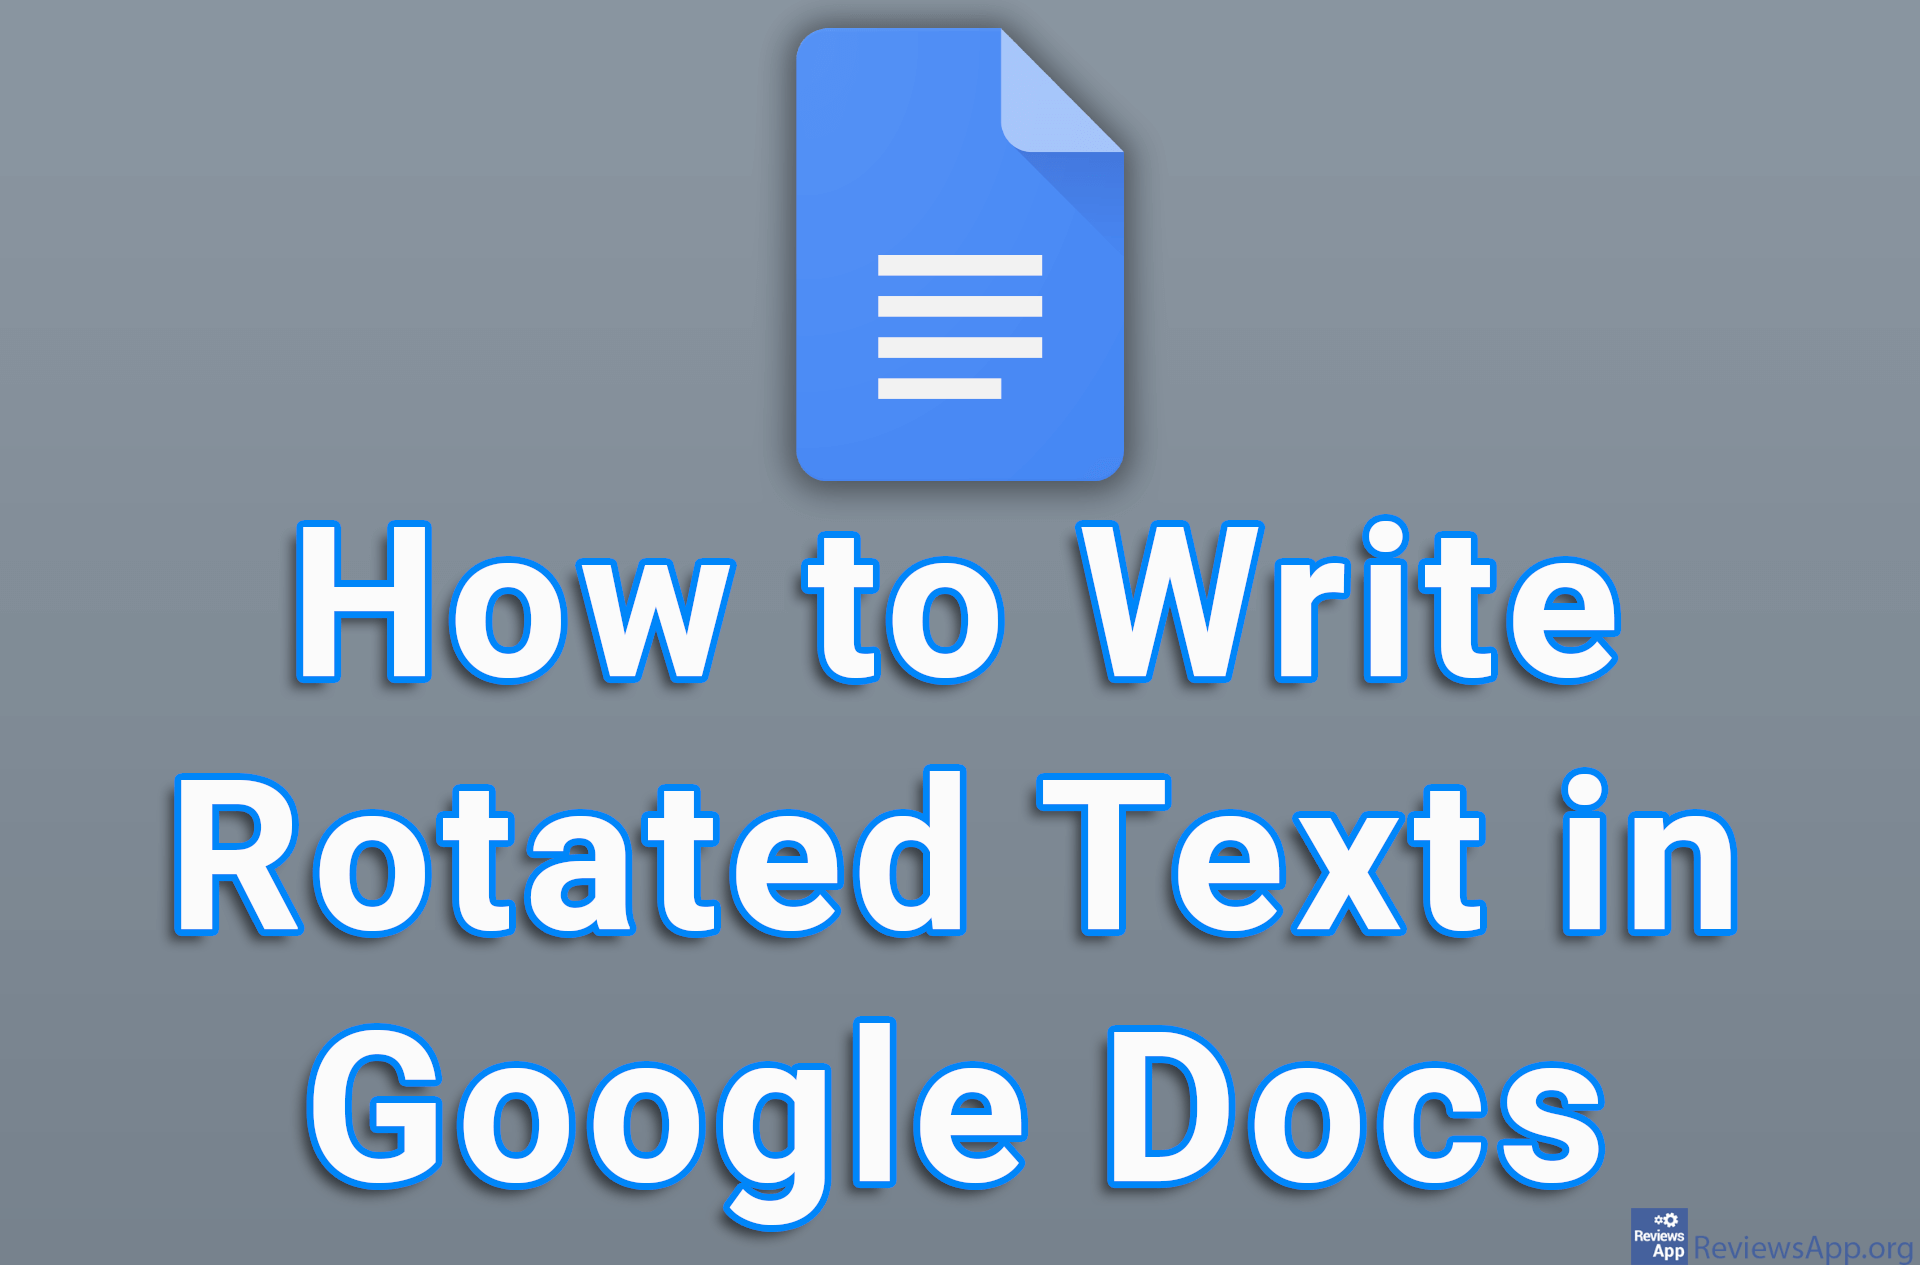 How to Write Rotated Text in Google Docs